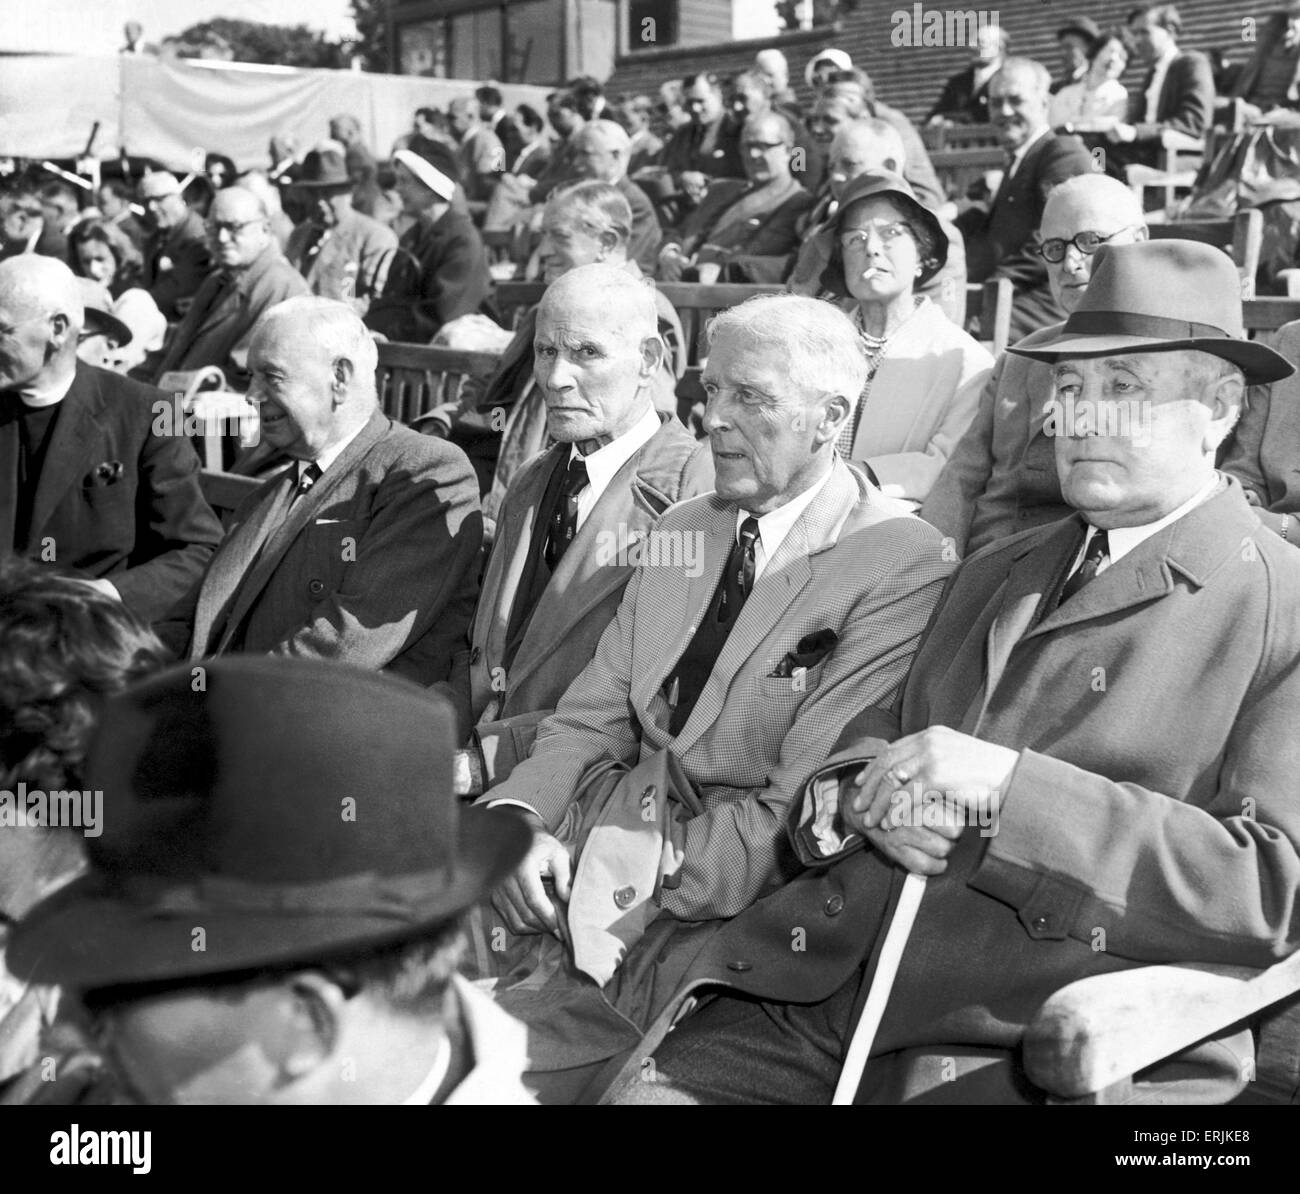 Australian cricket tour of England for the Ashes. England v Australia First Test match at Edgbaston. Four veteran England cricketers in the stands to watch the test match. Left to right: Ernest James 'Tiger' Smith, Sydney Barnes, Frank Woolley and Wilfred Rhodes.  . 8th June 1961. Stock Photo